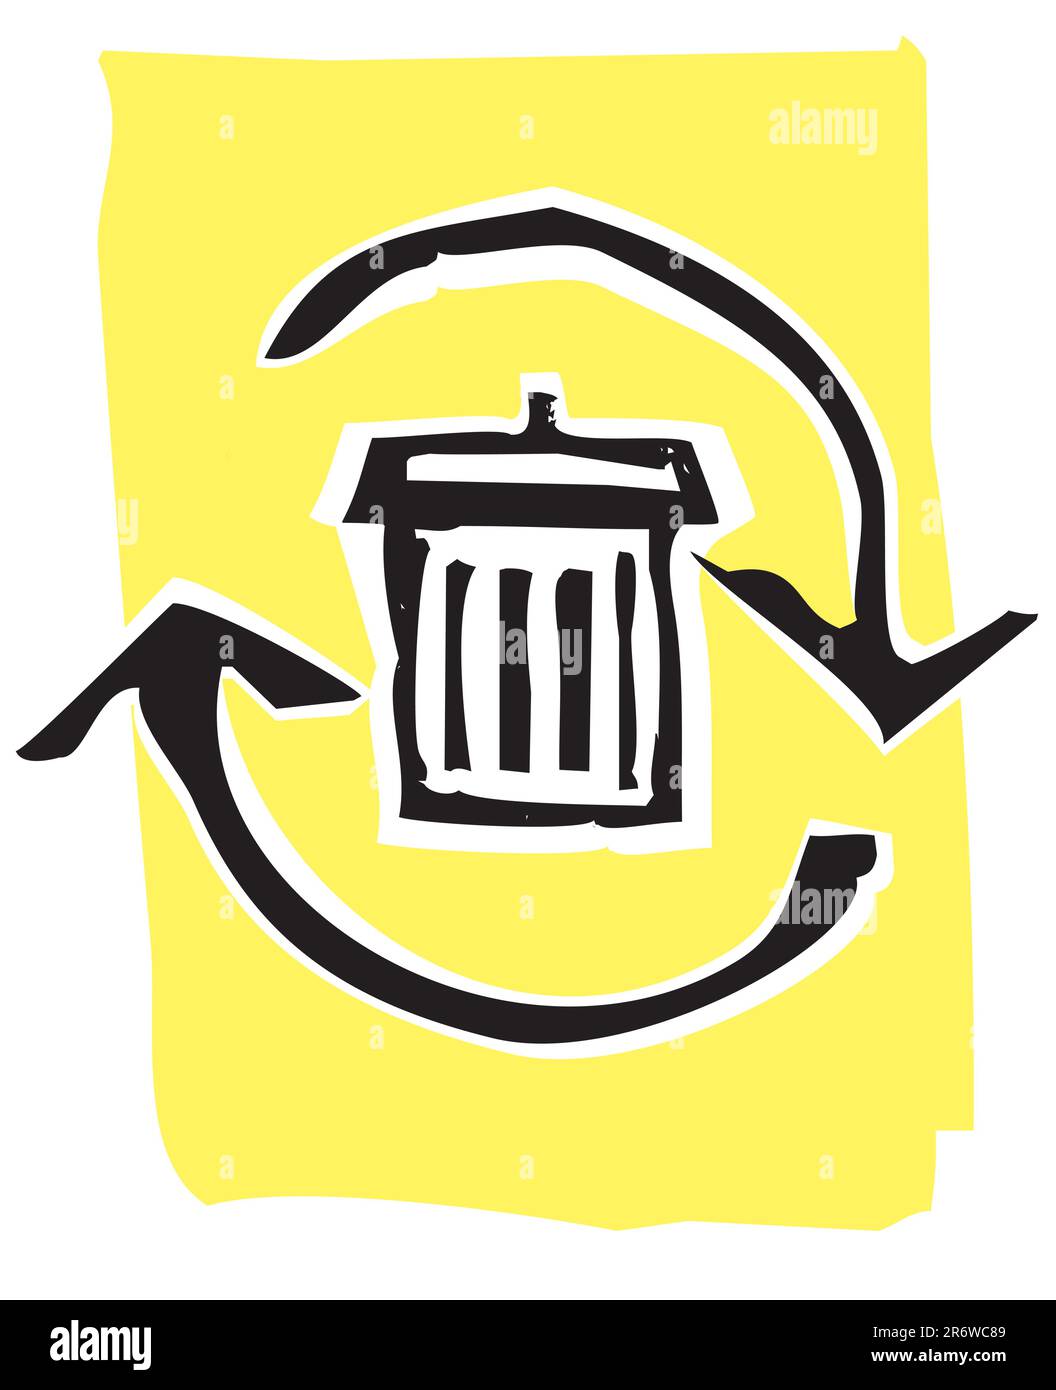 Trashcan in a circle of recycle or refresh arrows. Stock Vector